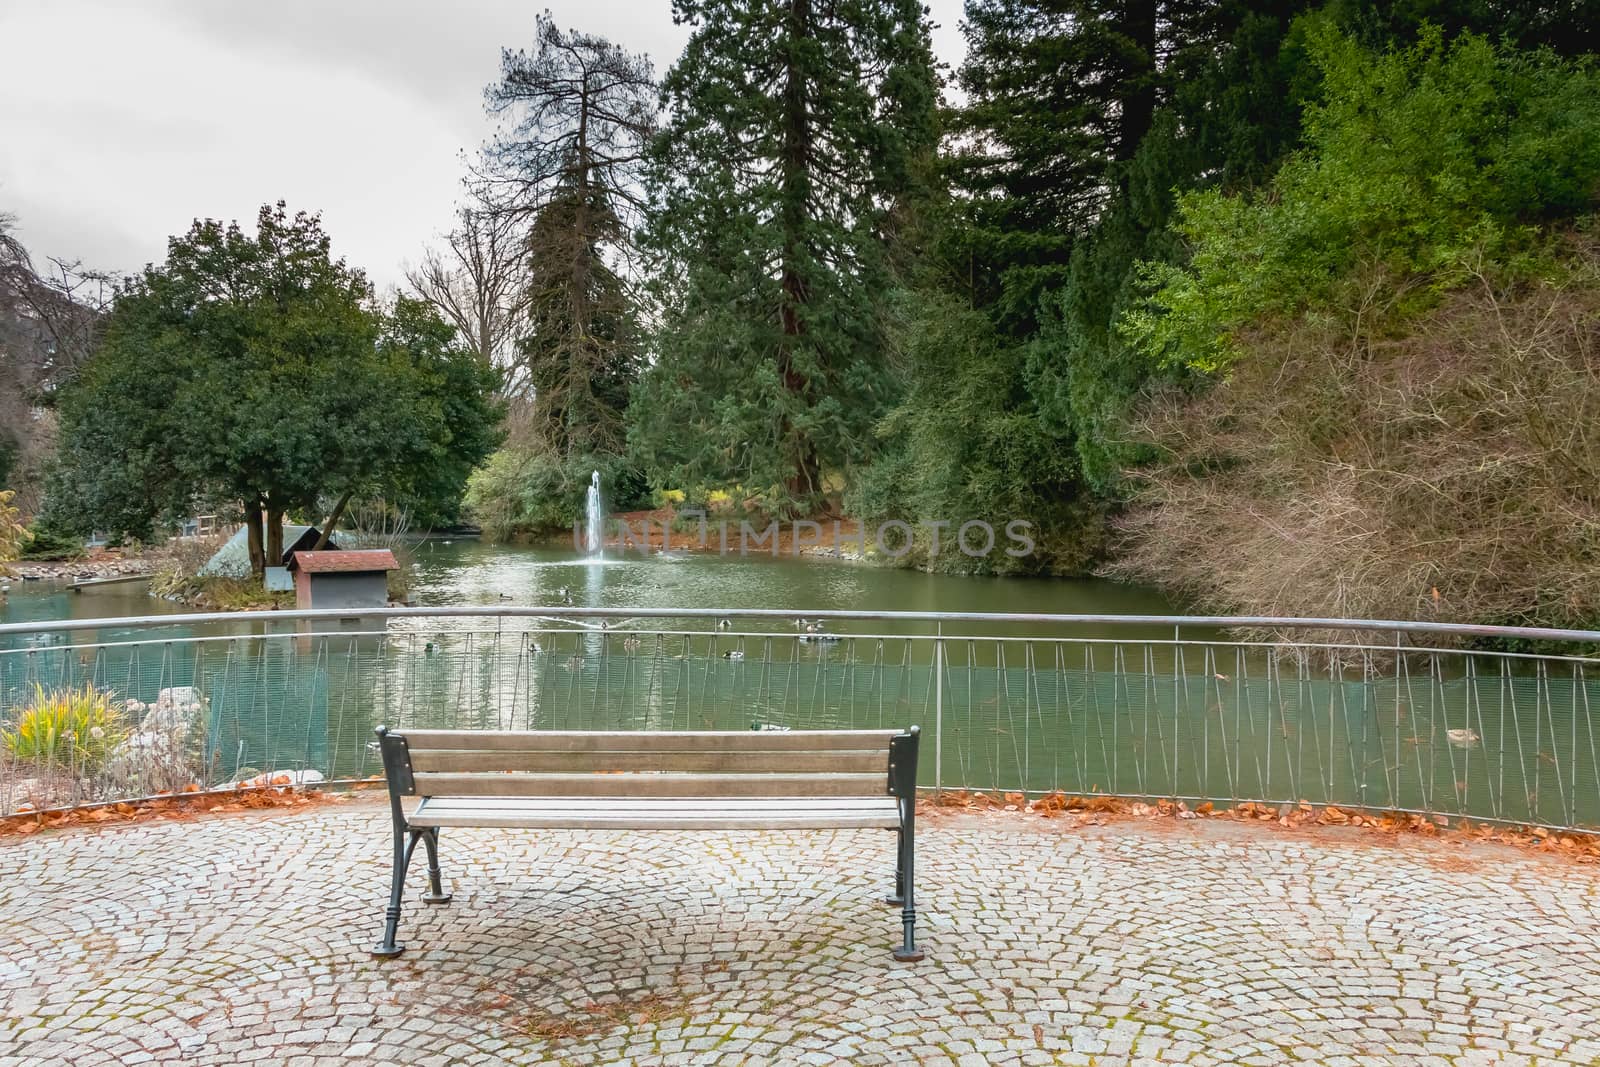 peaceful atmosphere around a small pond with ducks and a public bench